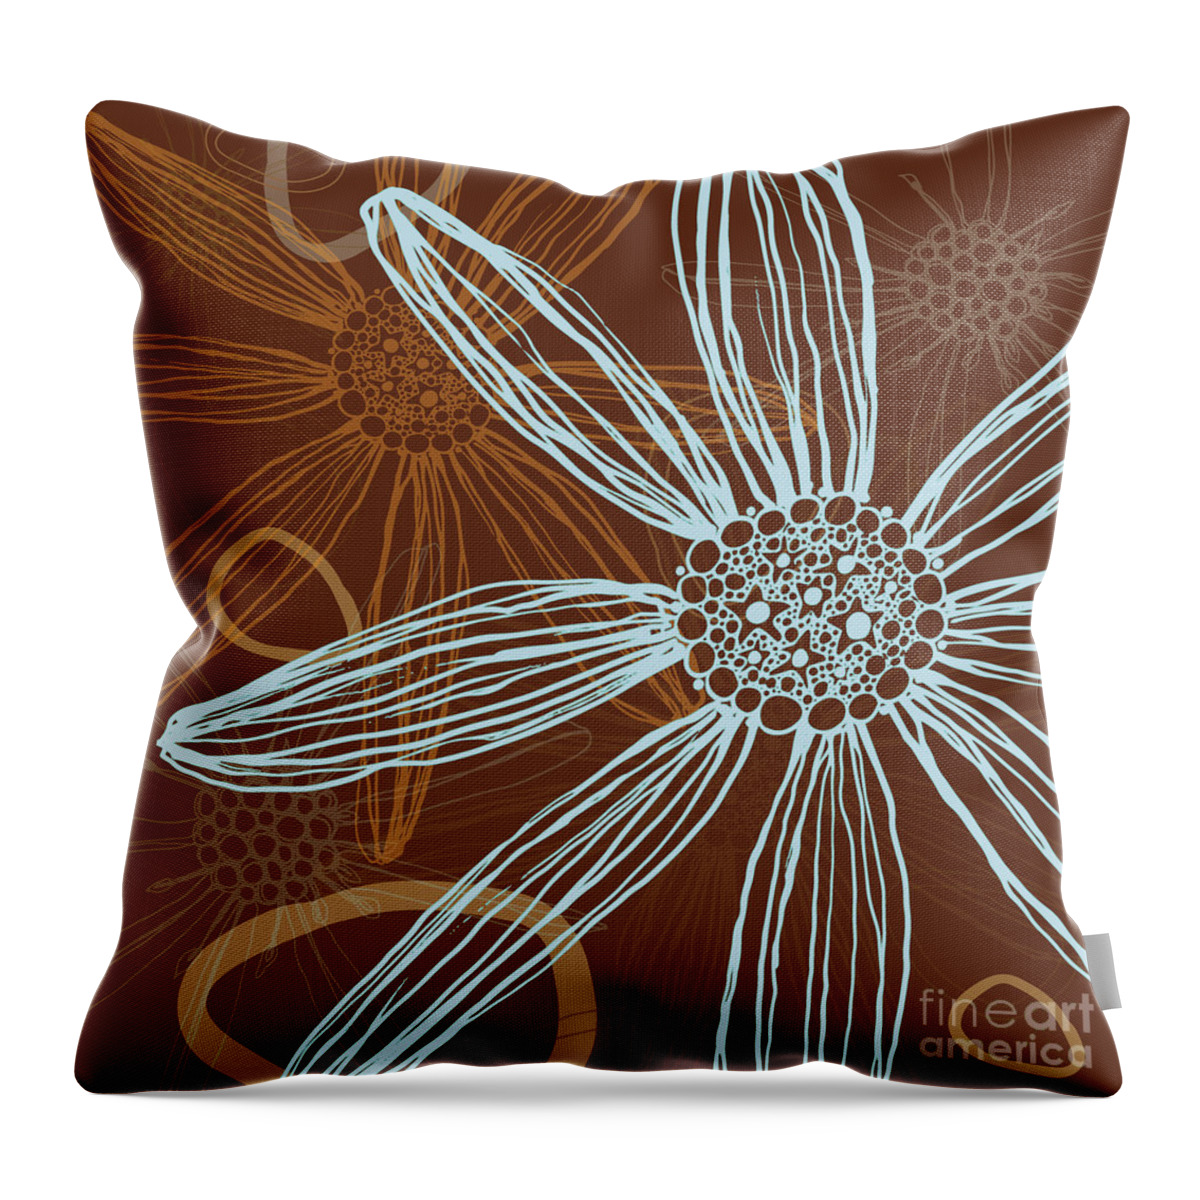 Flower Silhouettes Throw Pillow featuring the digital art Flower Silhouette Modern Line Art in Brown by Patricia Awapara